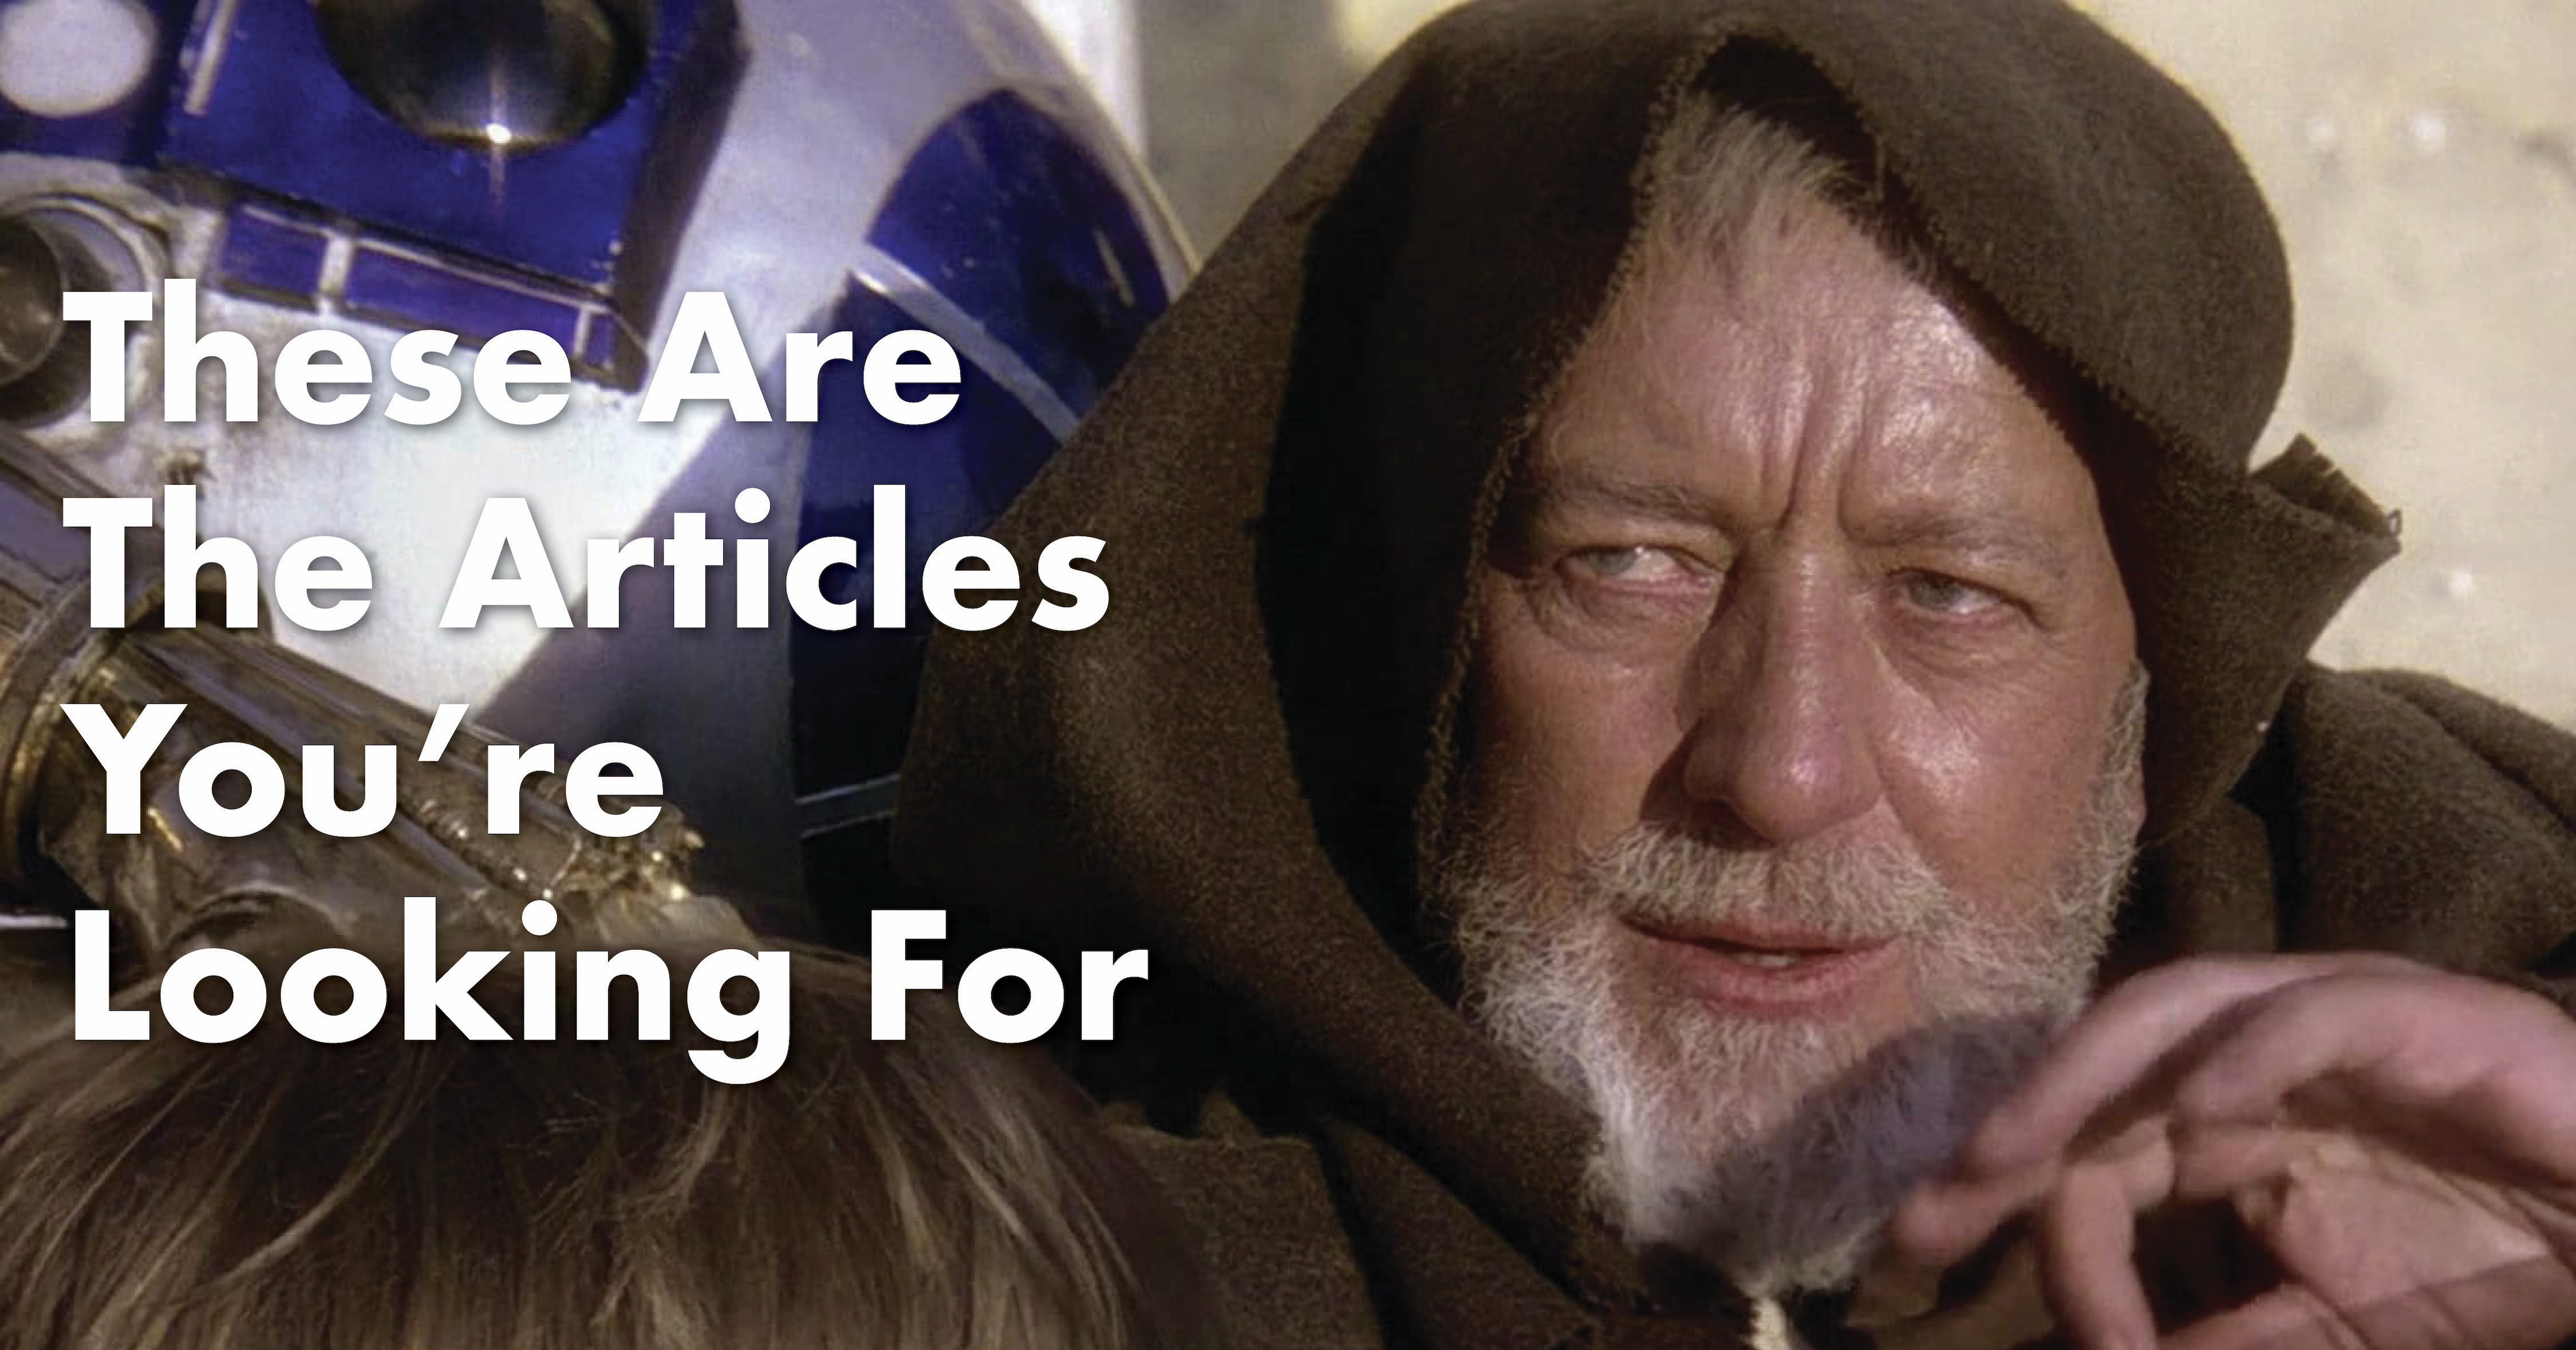 These Are The Articles You're Looking For: 4 Helpful Articles From Our Dev Team